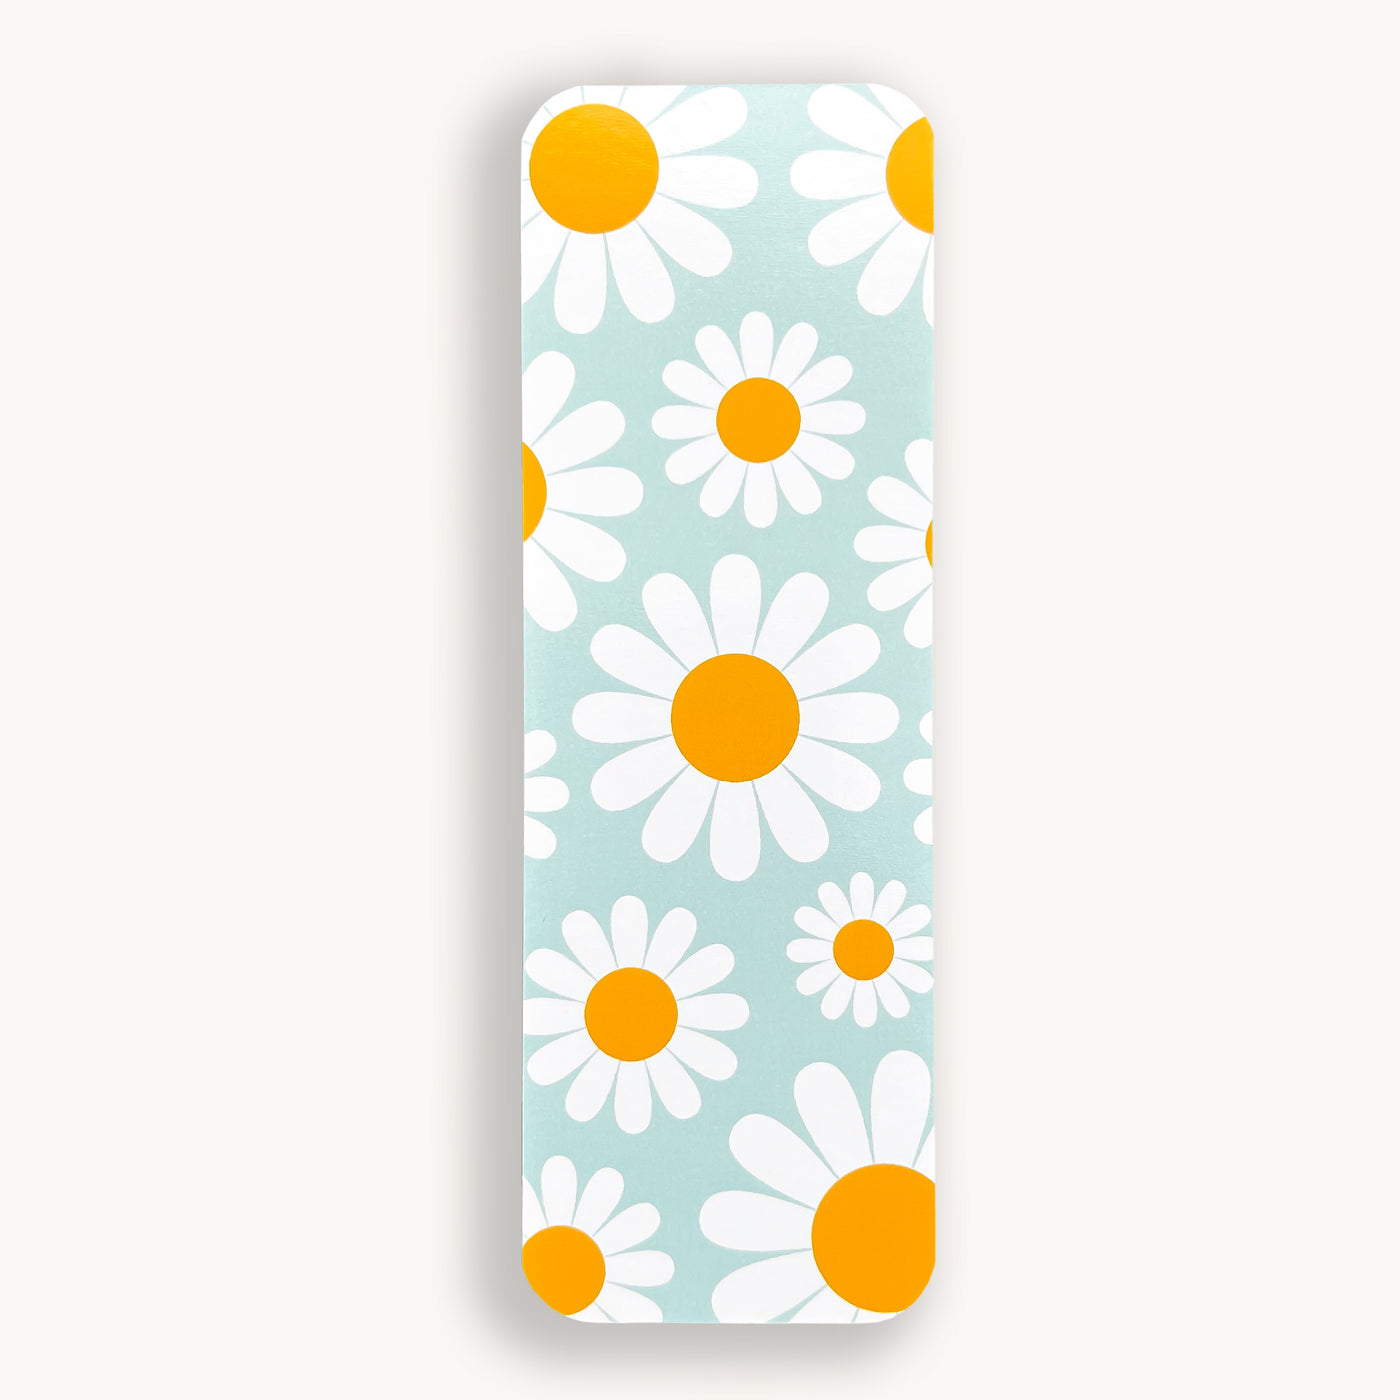 Daisies on misty teal background bookmark with rounded corners by Simpliday Paper, Olga Nagorna.